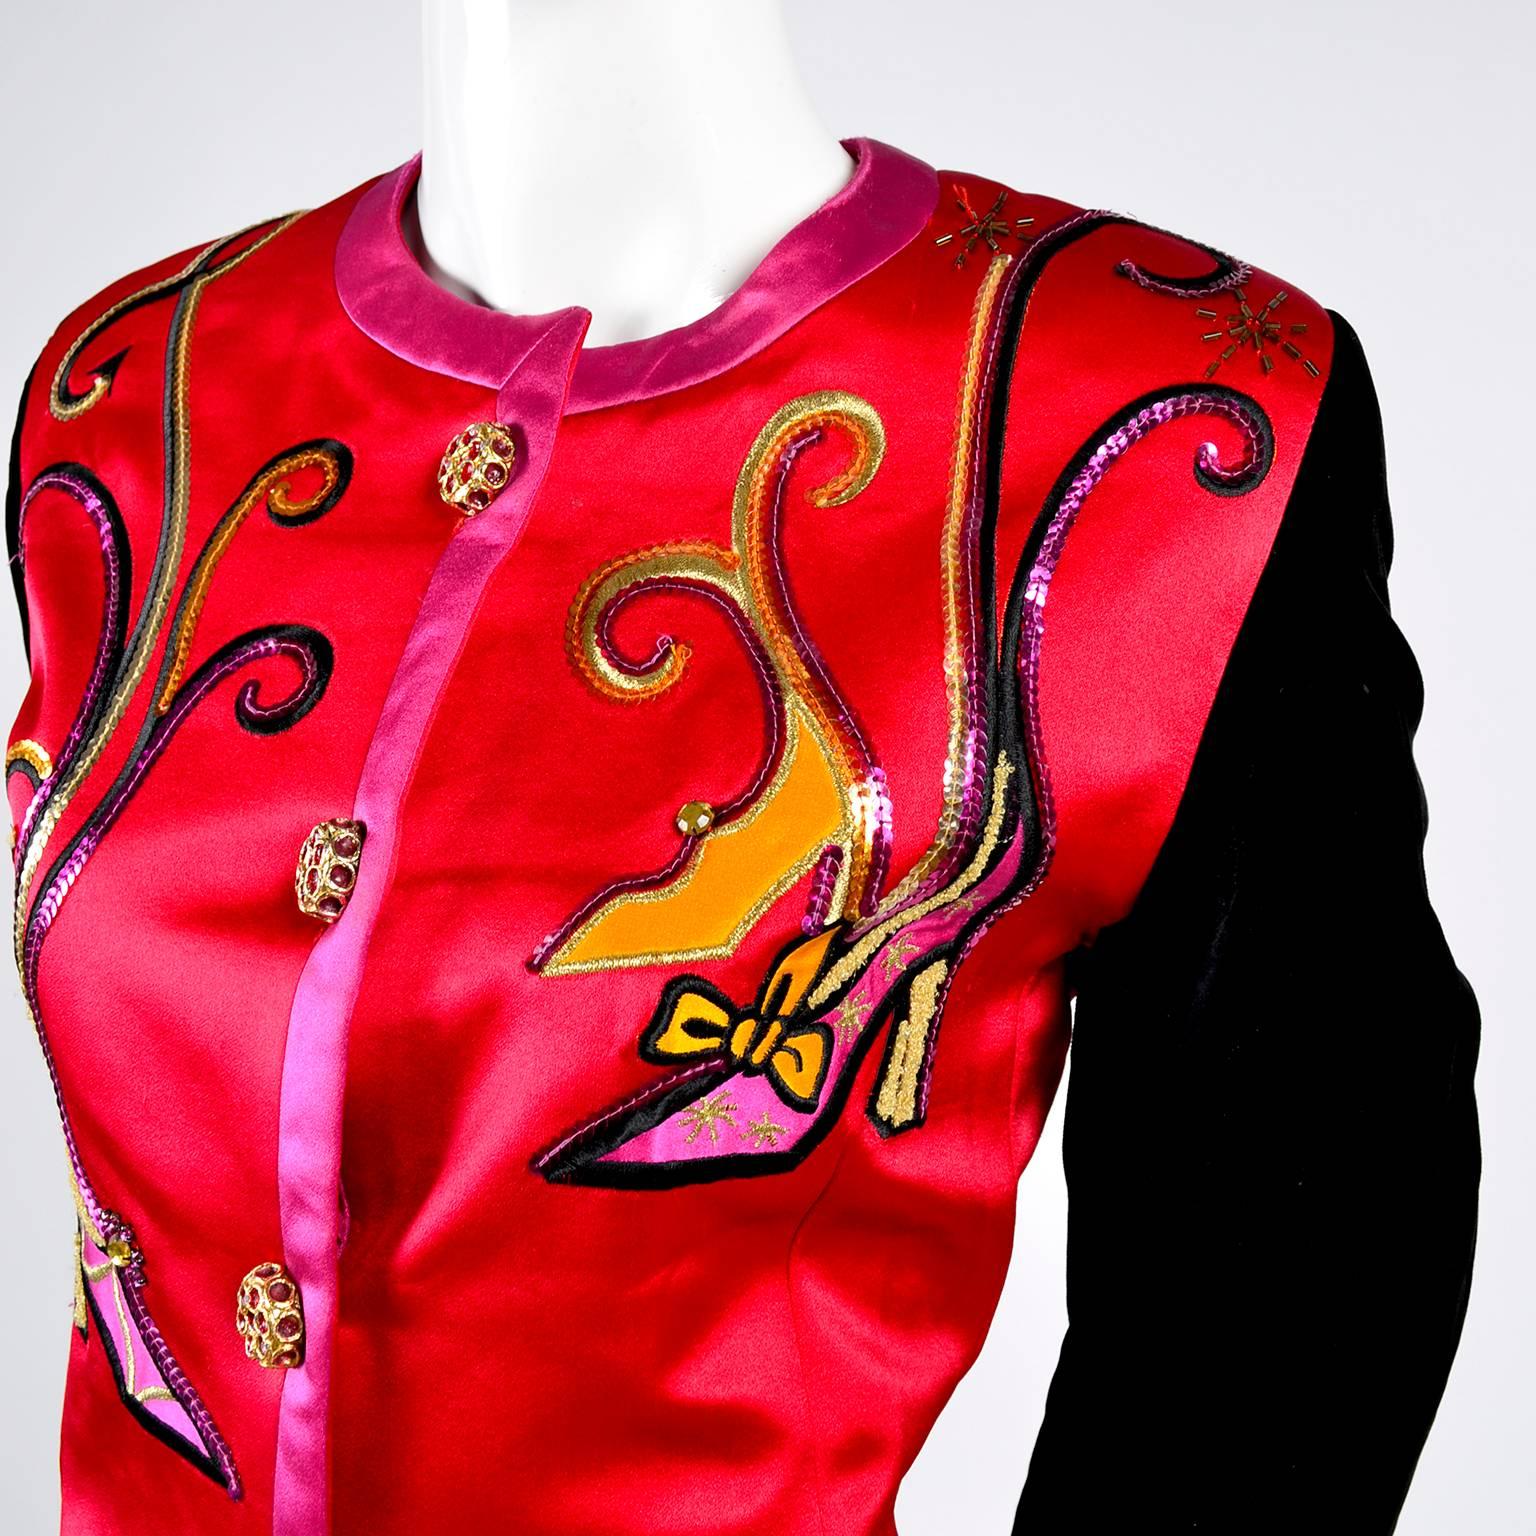 This 1980's vintage Escada jacket is in red satin with pink satin trim and has long black velvet sleeves.  The blazer has fabulous gold buttons with pink 